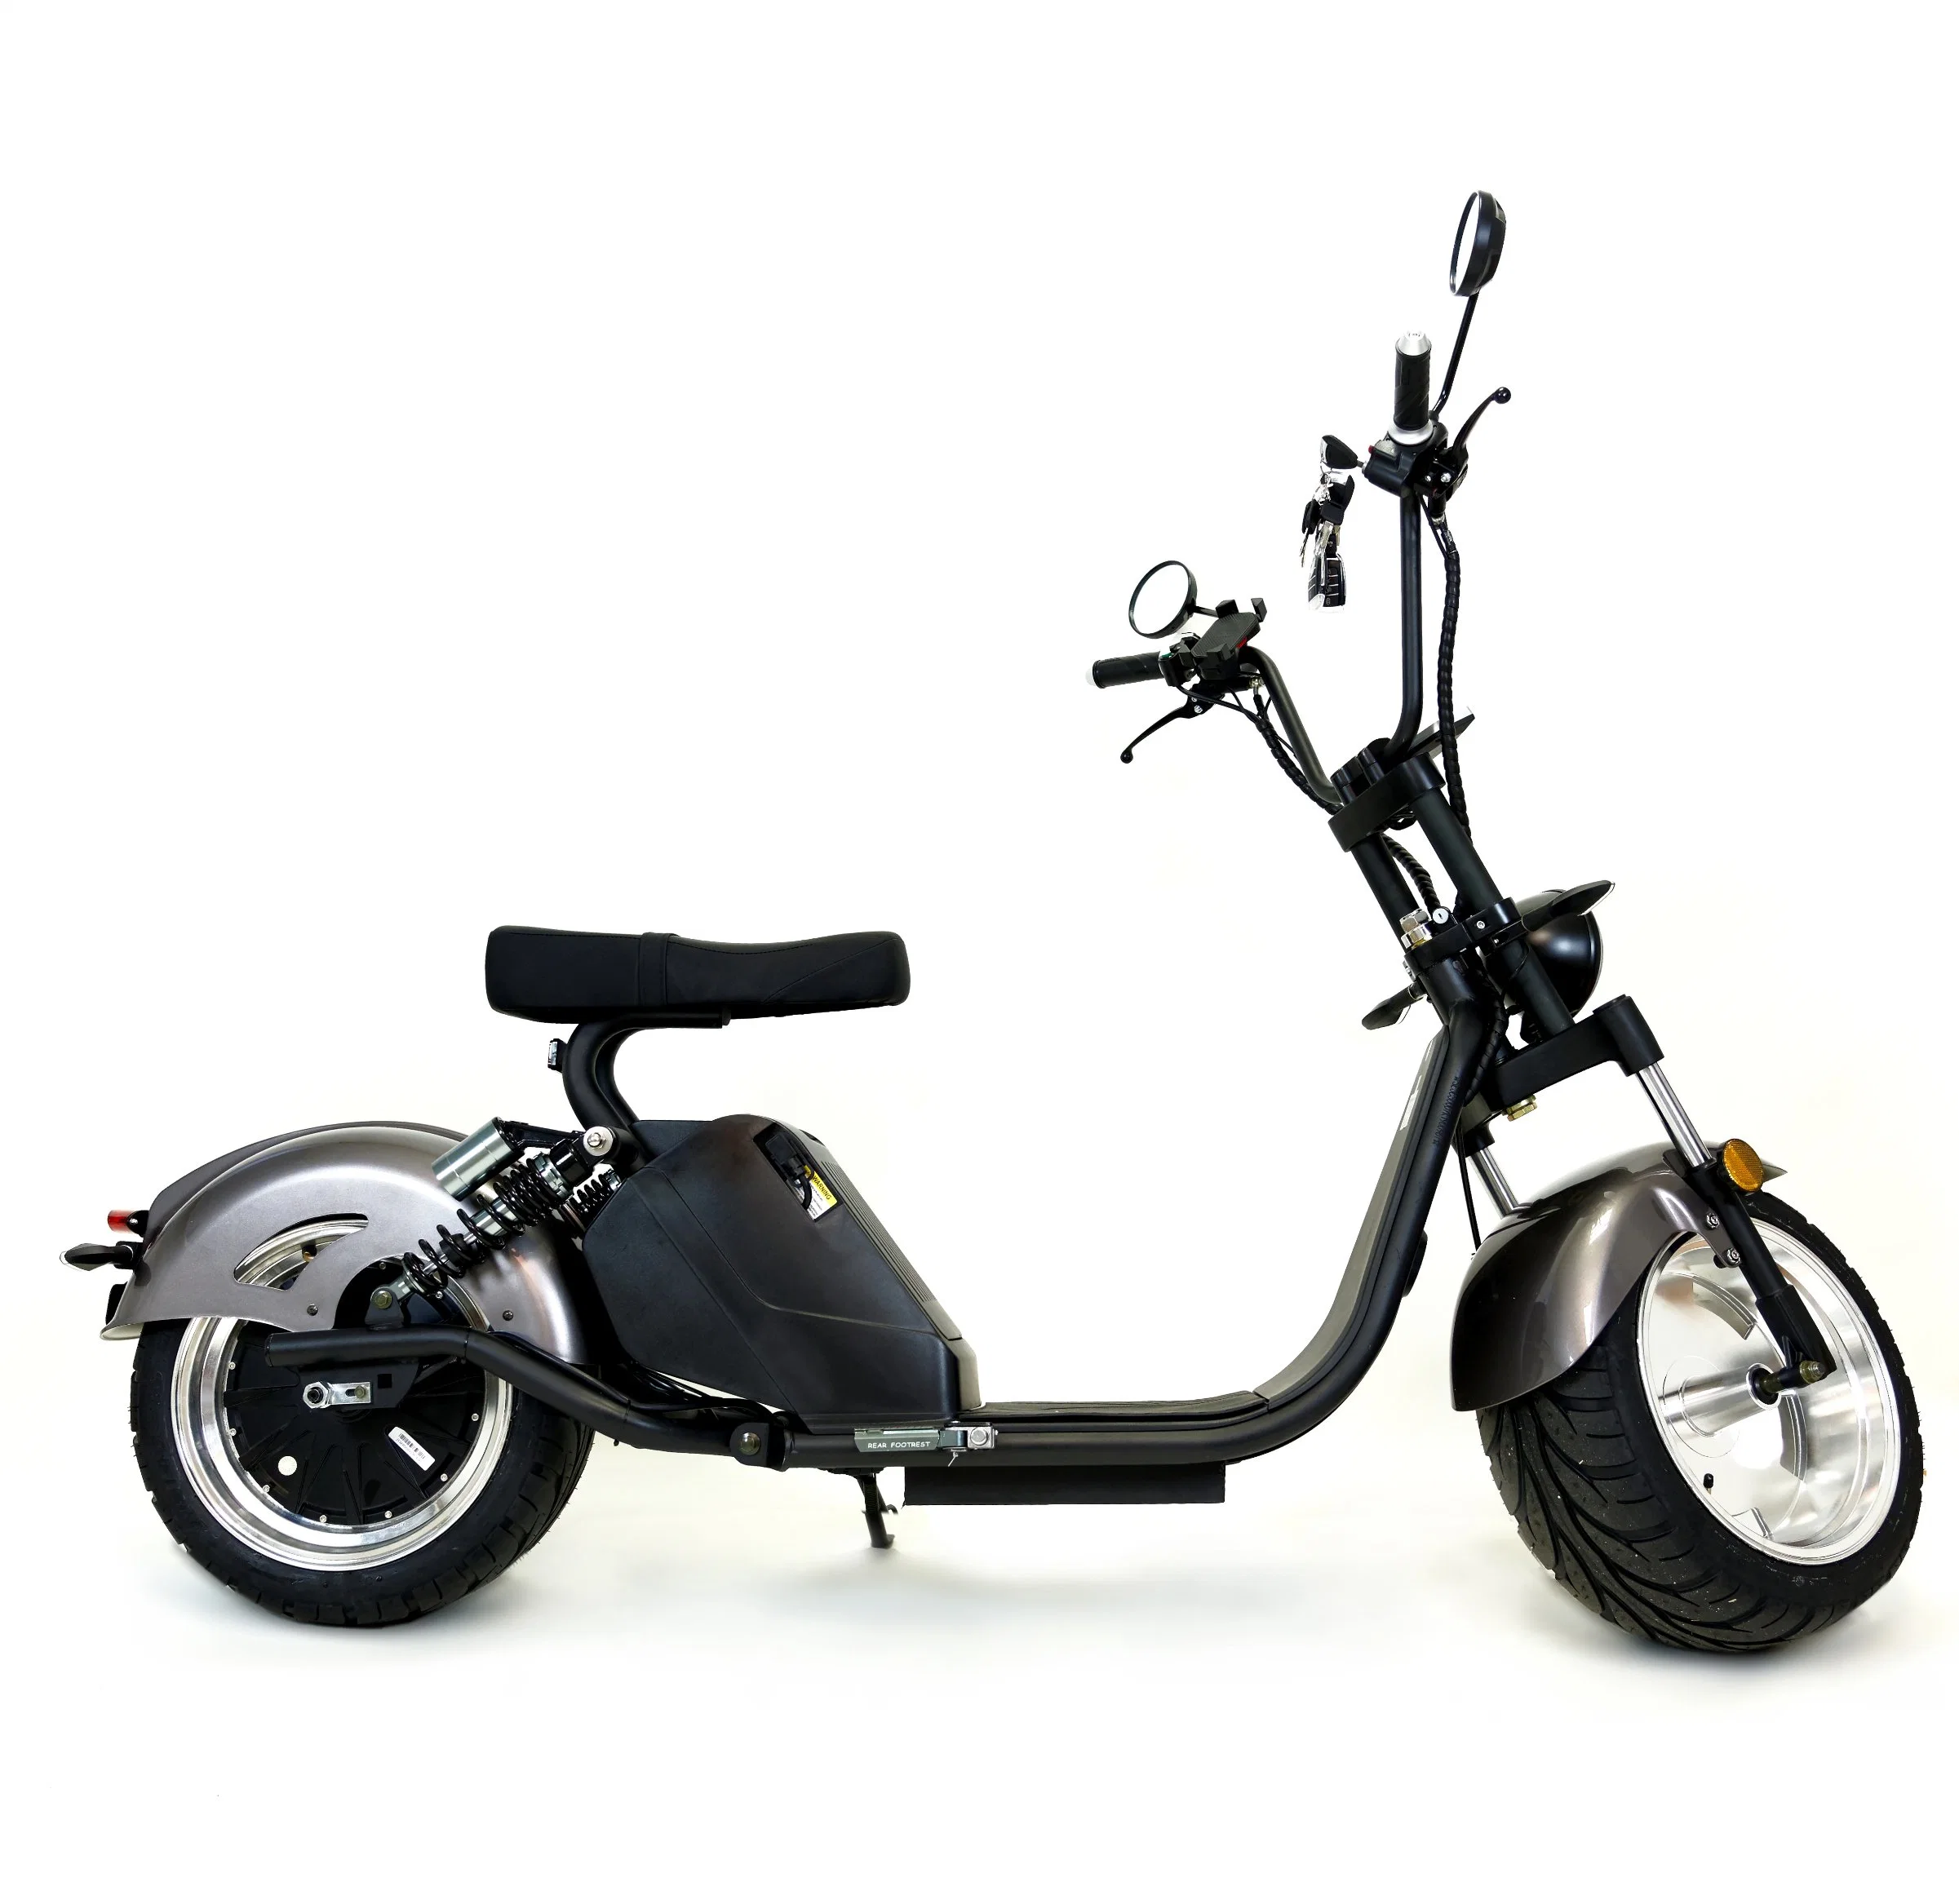 Convenient Lithium Battery 13 Inch Long Range for Ride Single Seat Electric Motorcycle with Simple Style